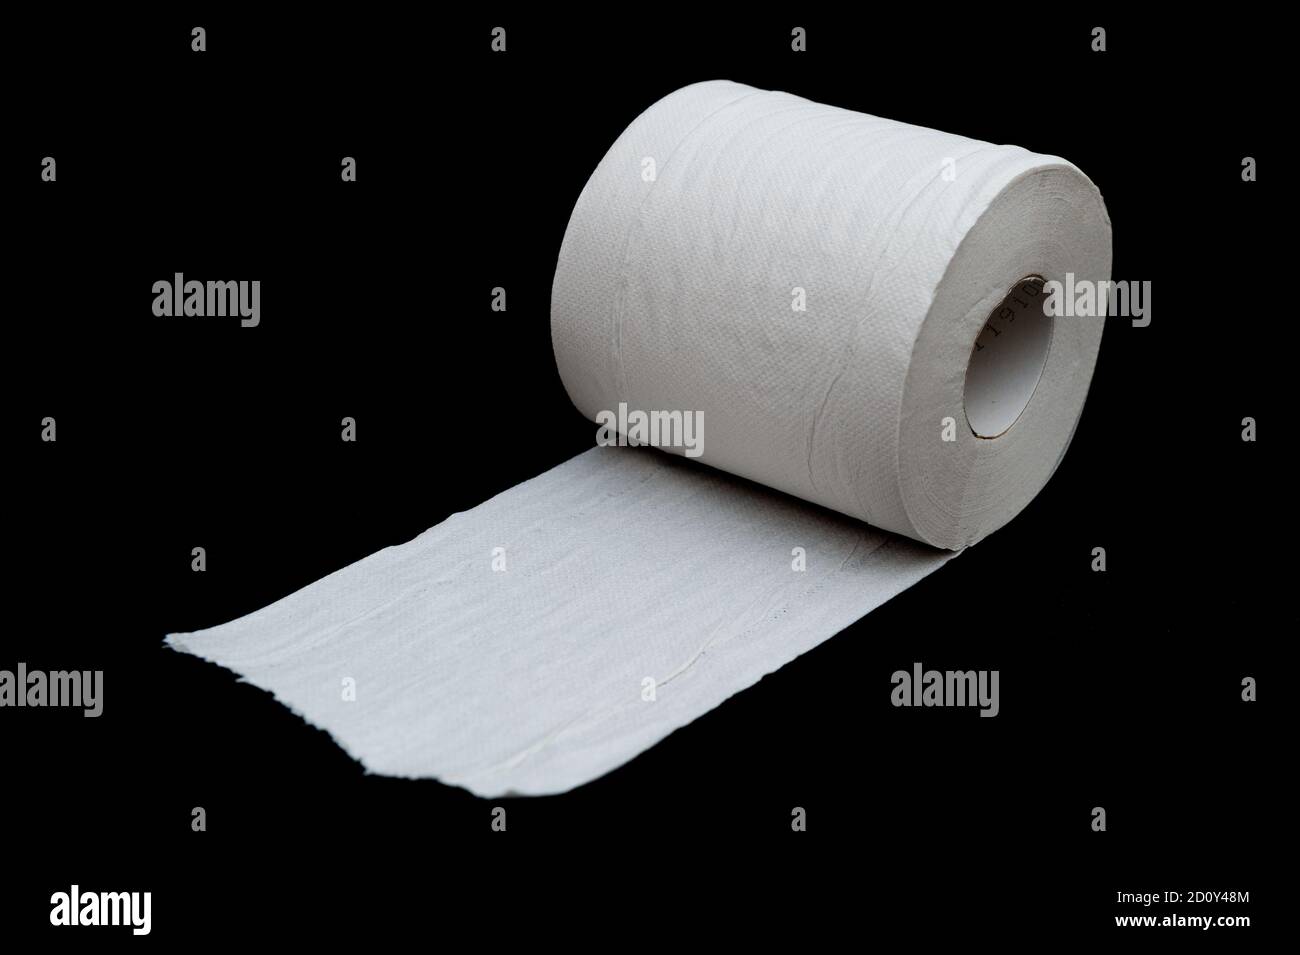 Whats the circumference of a toilet paper roll